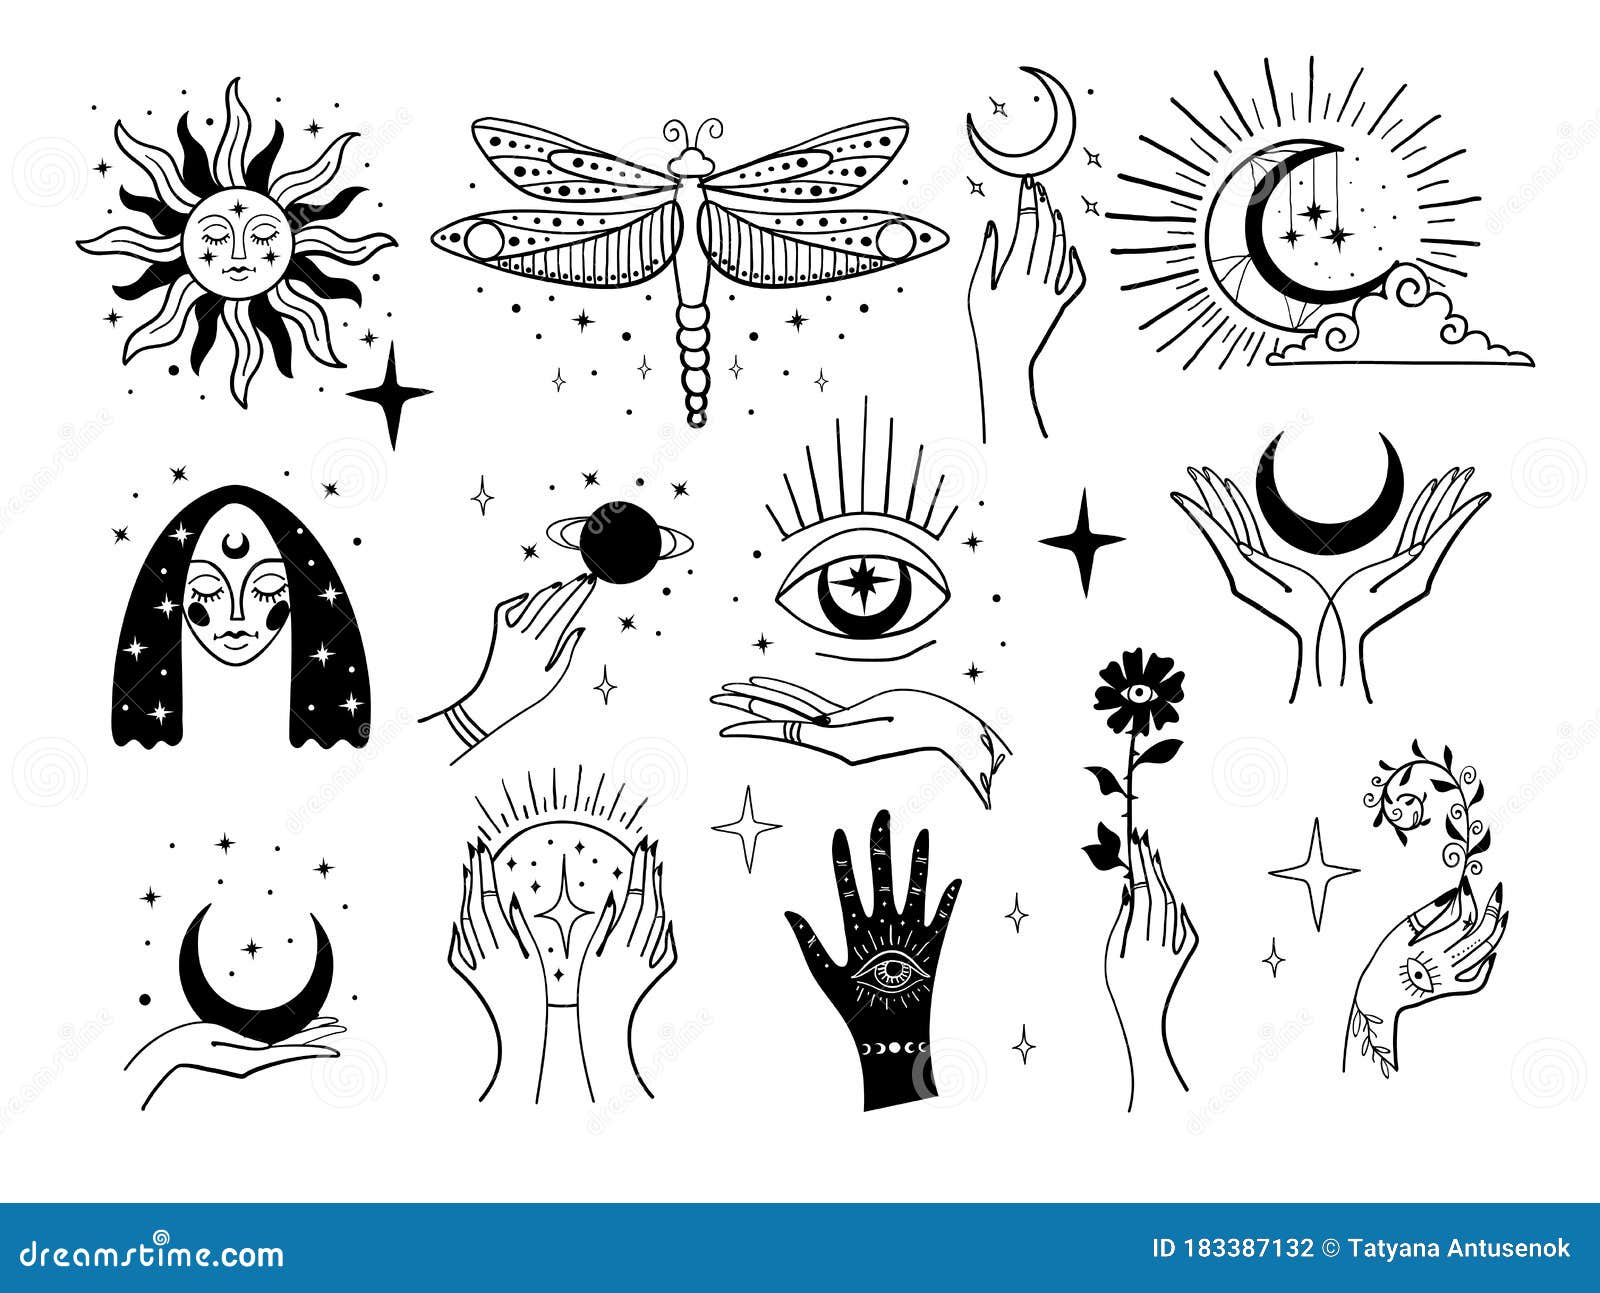 34150 Witchcraft Tattoo Images Stock Photos  Vectors  Shutterstock